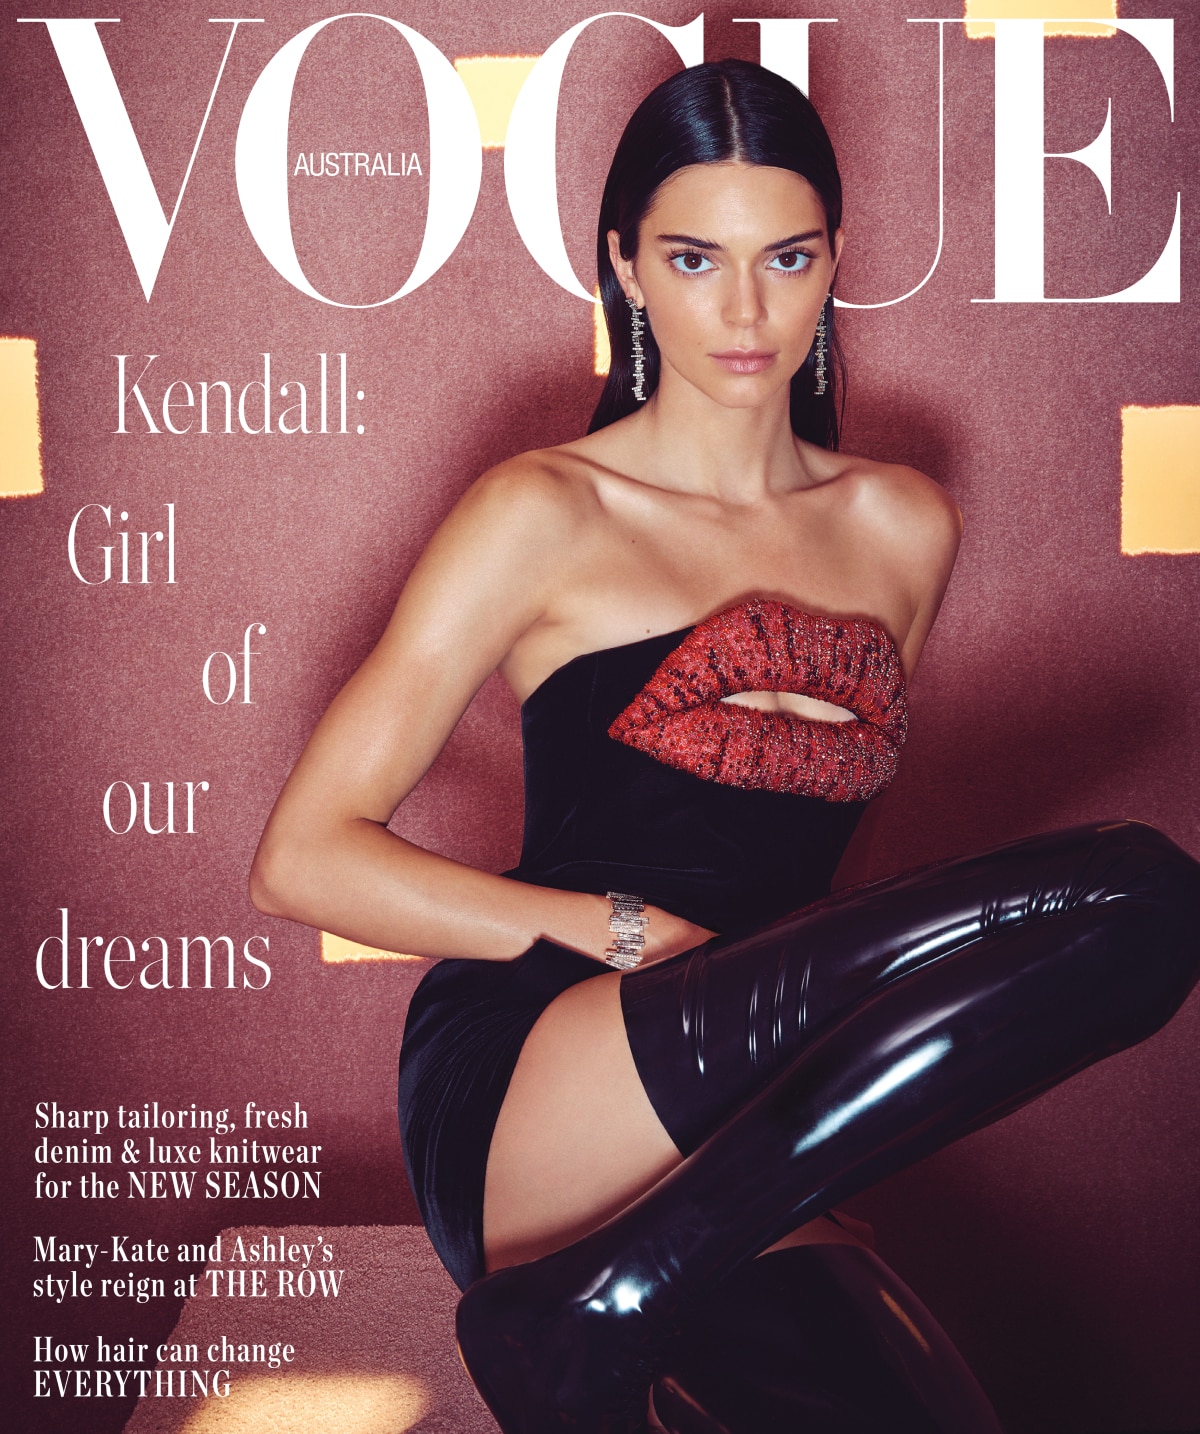 Kendall Jenner on modelling, coming from a name and keeping her relationship private